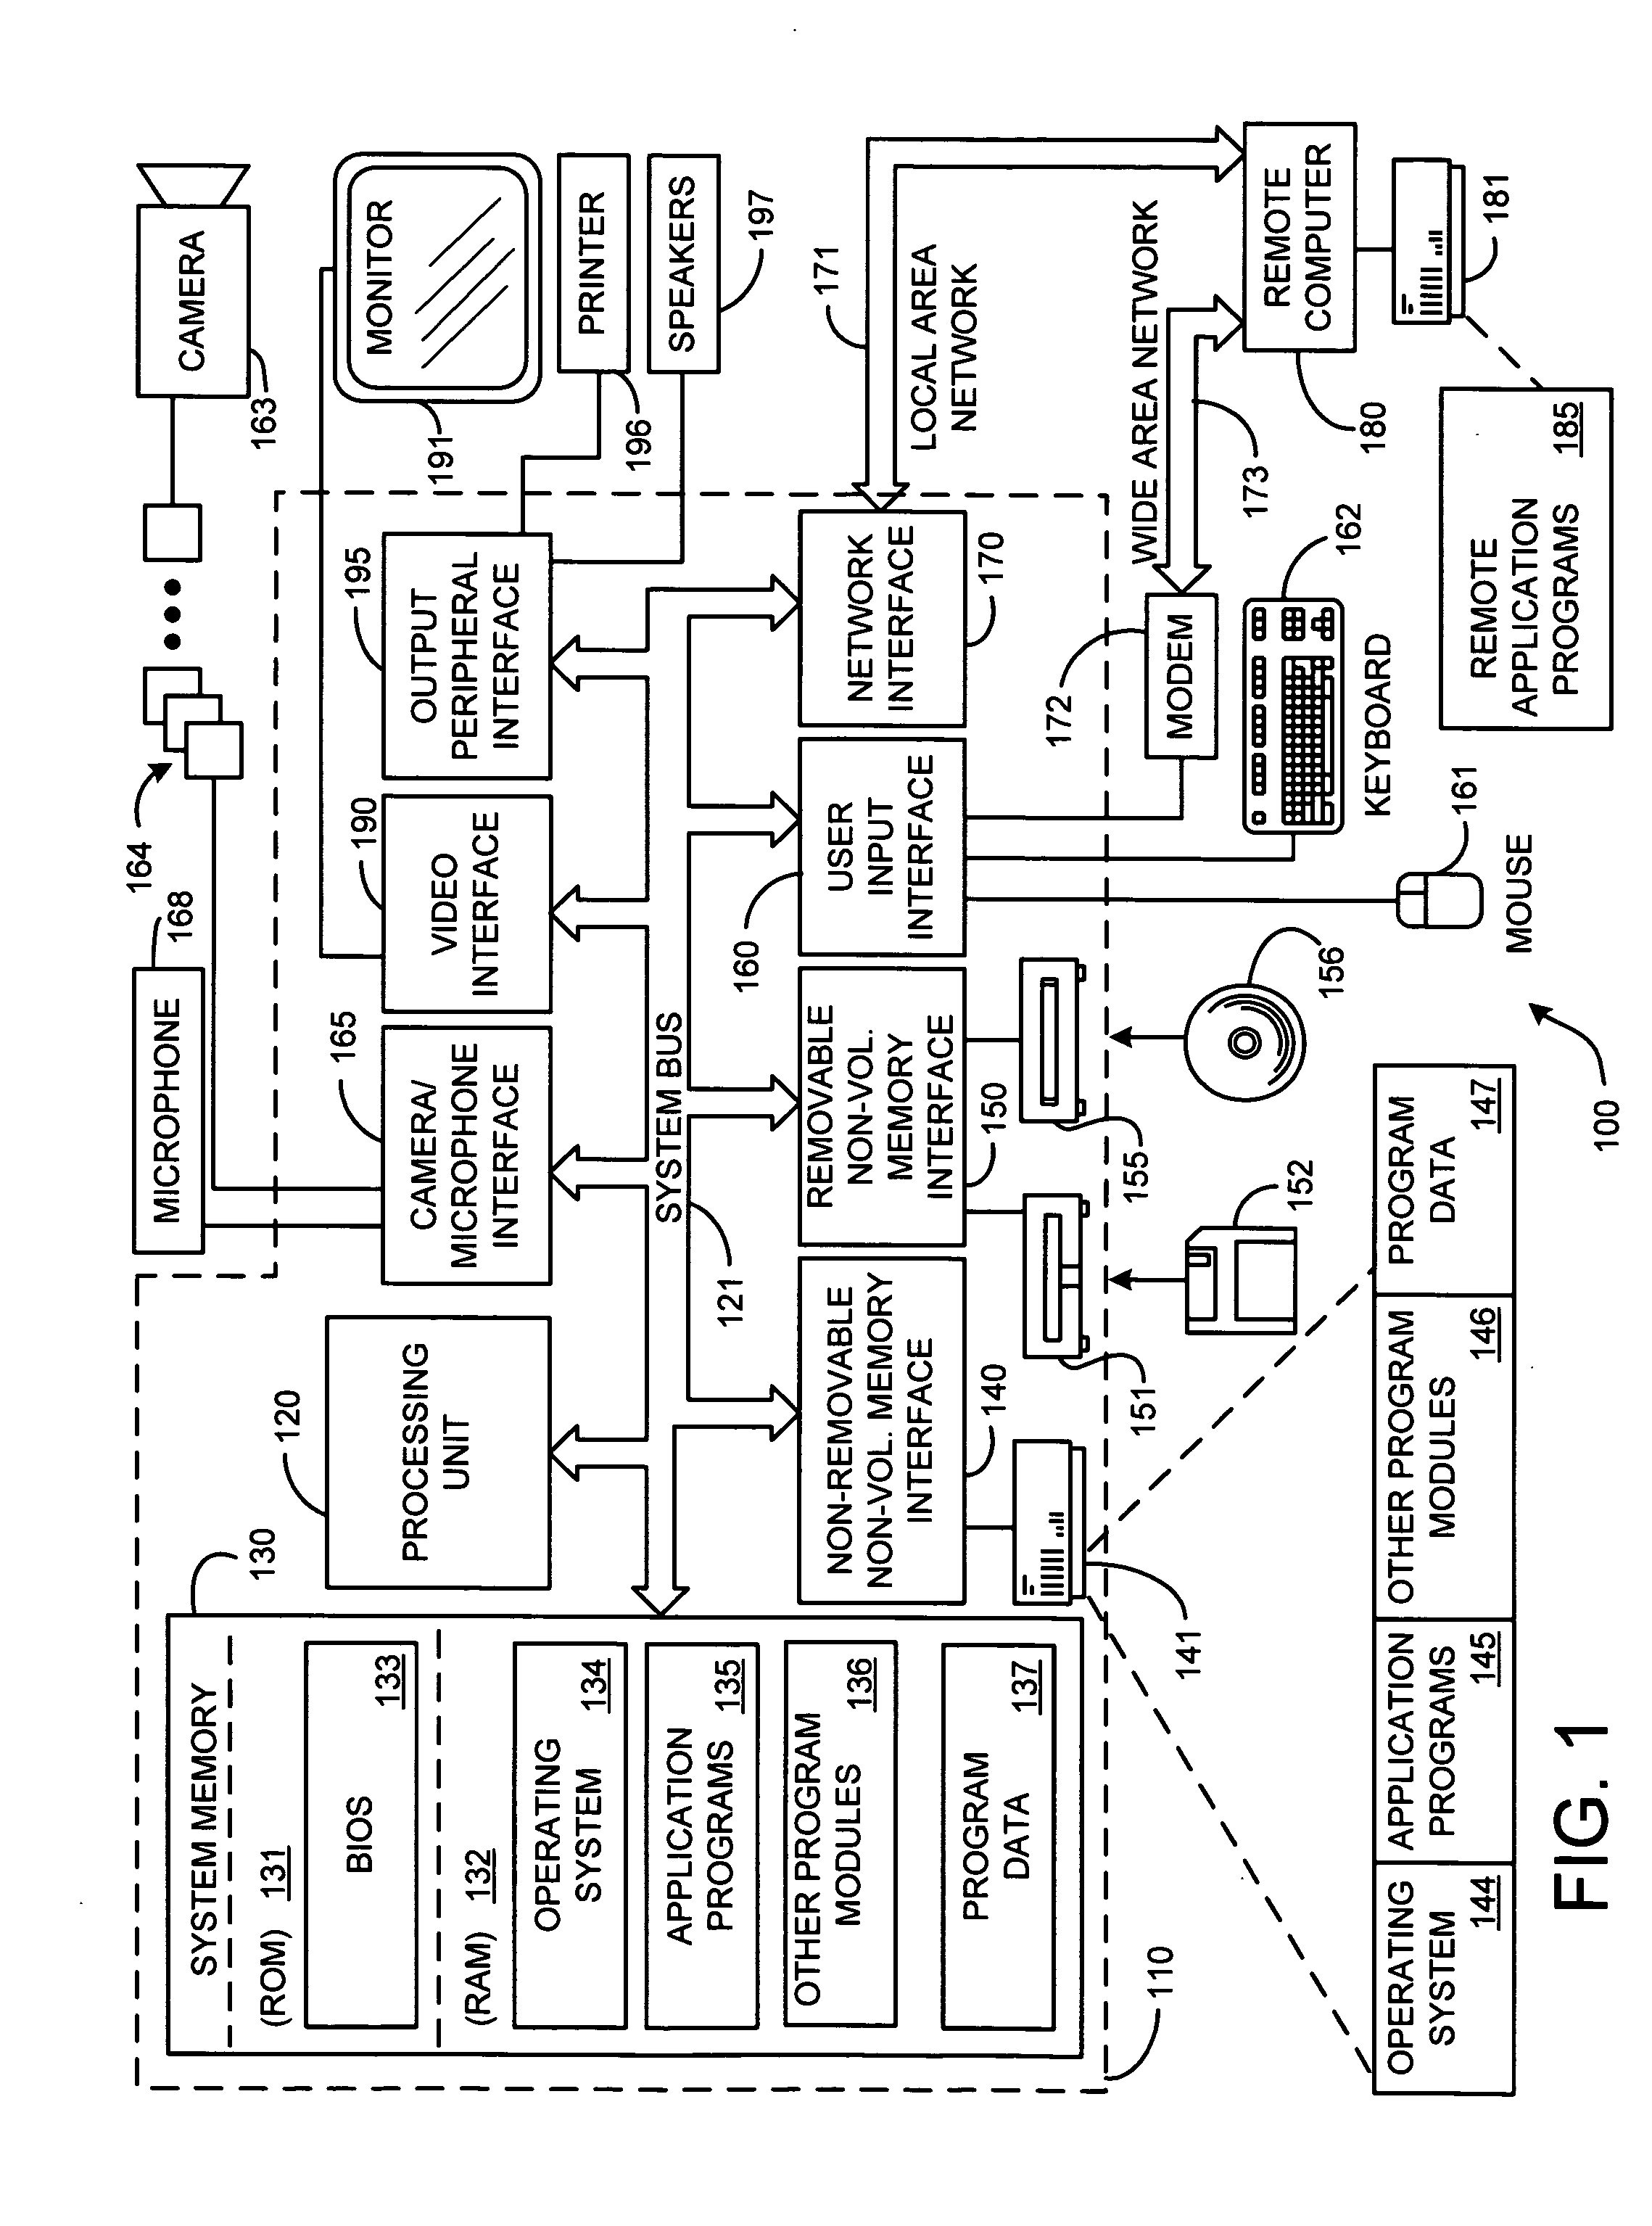 System and method for on-line and off-line advertising in content delivered to a display screen